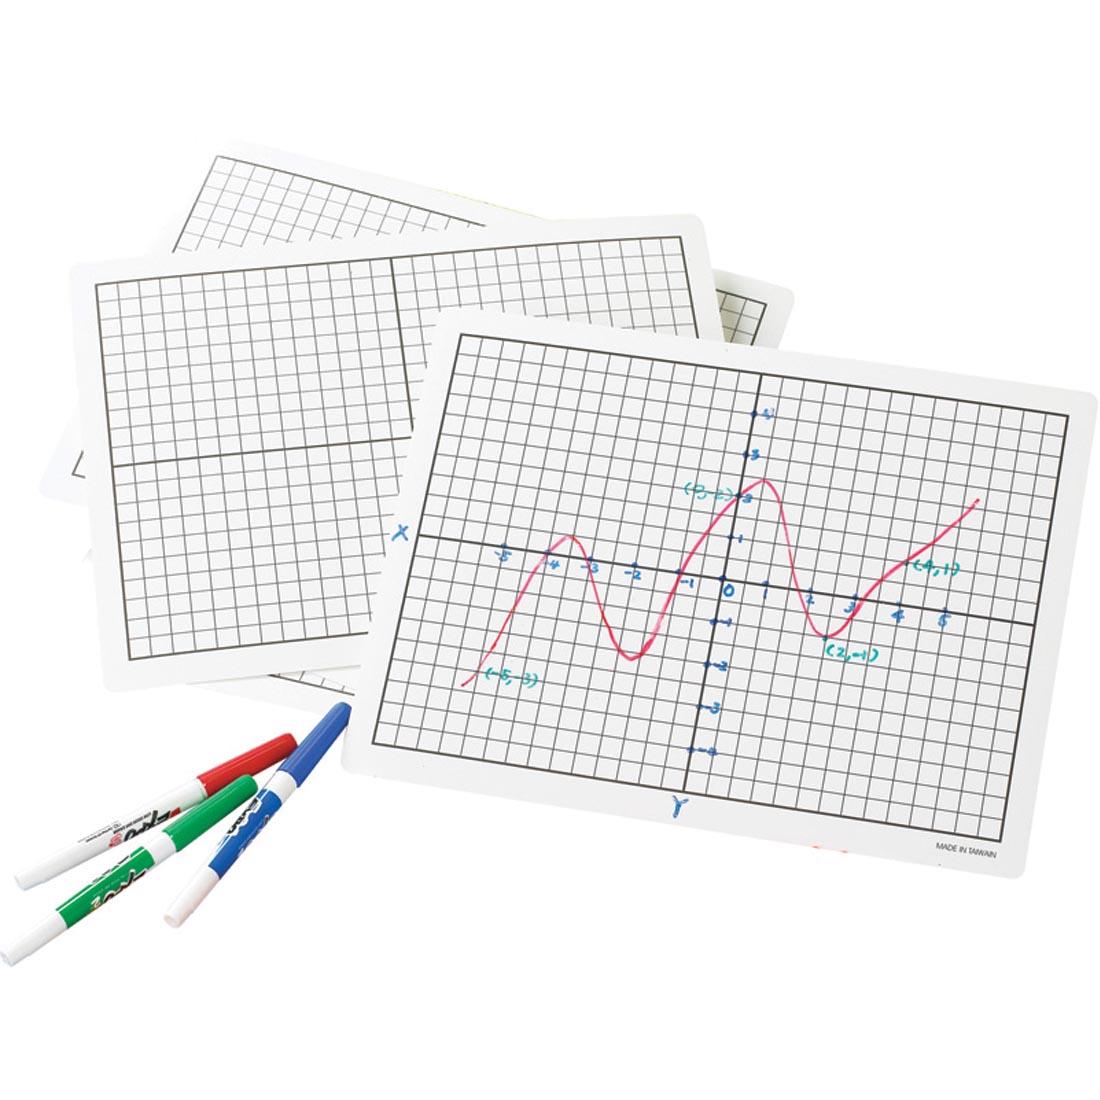 Write-On/Wipe-Off Coordinate Mats by Didax Shown In Use With Dry Erase Markers